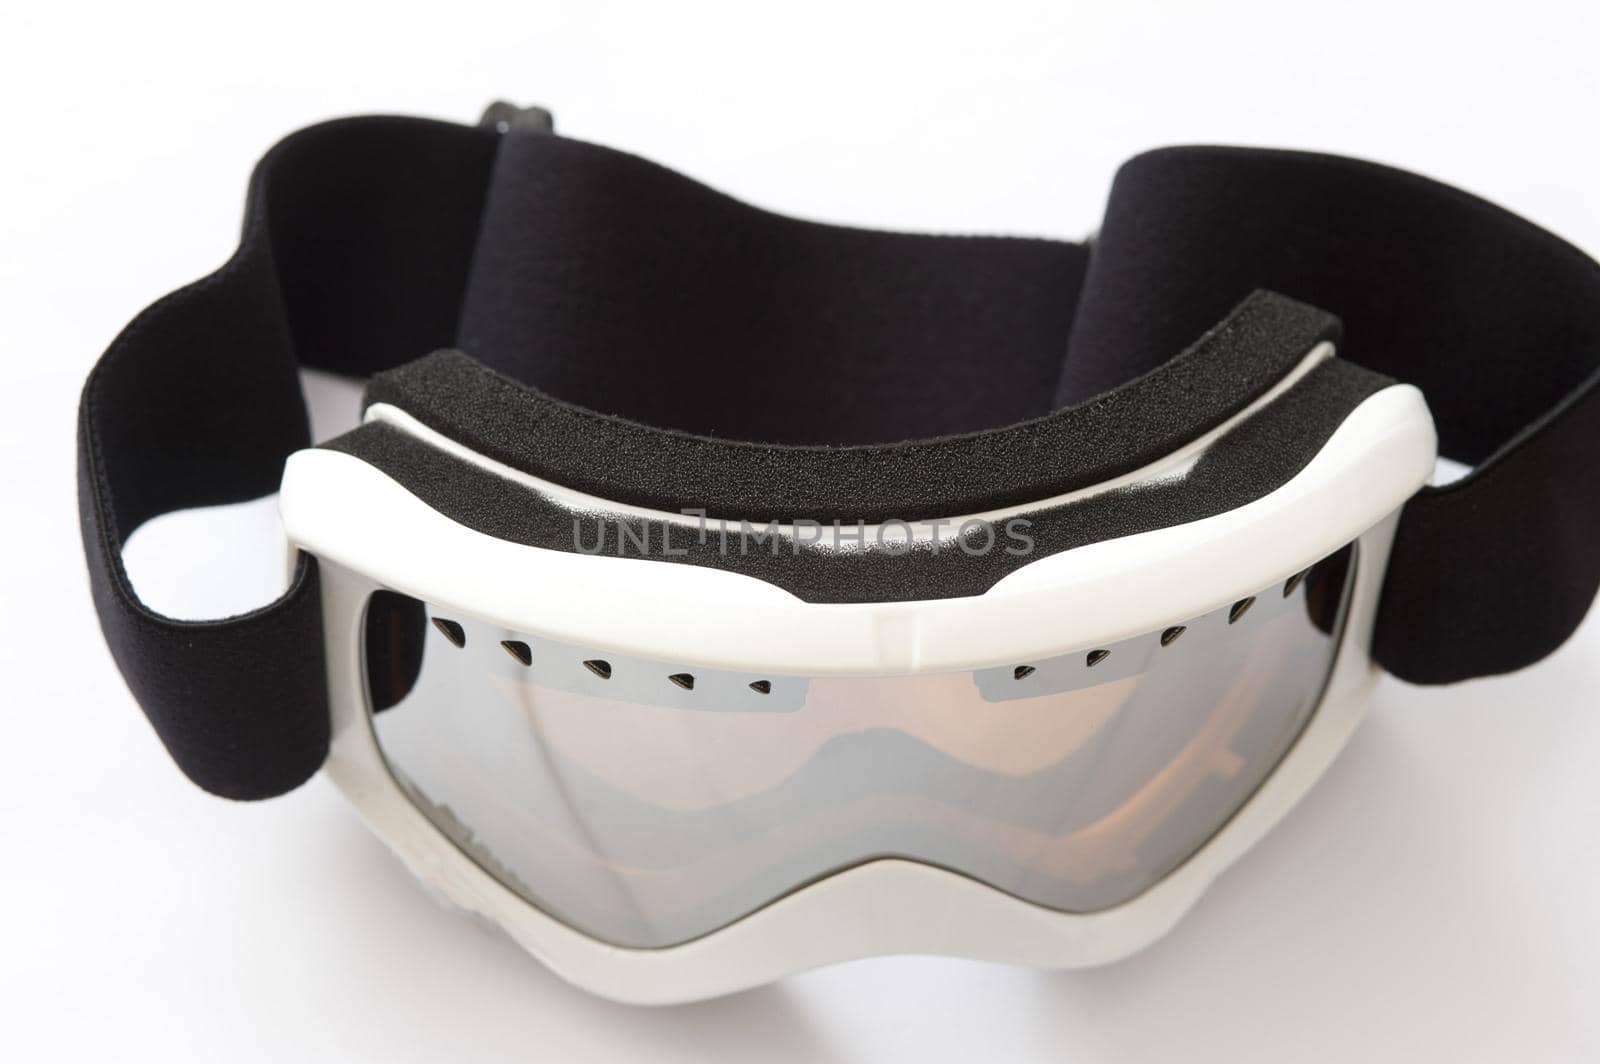 Snowboarding goggles on a white background in a winter sport, vacation and healthy active lifestyle concept